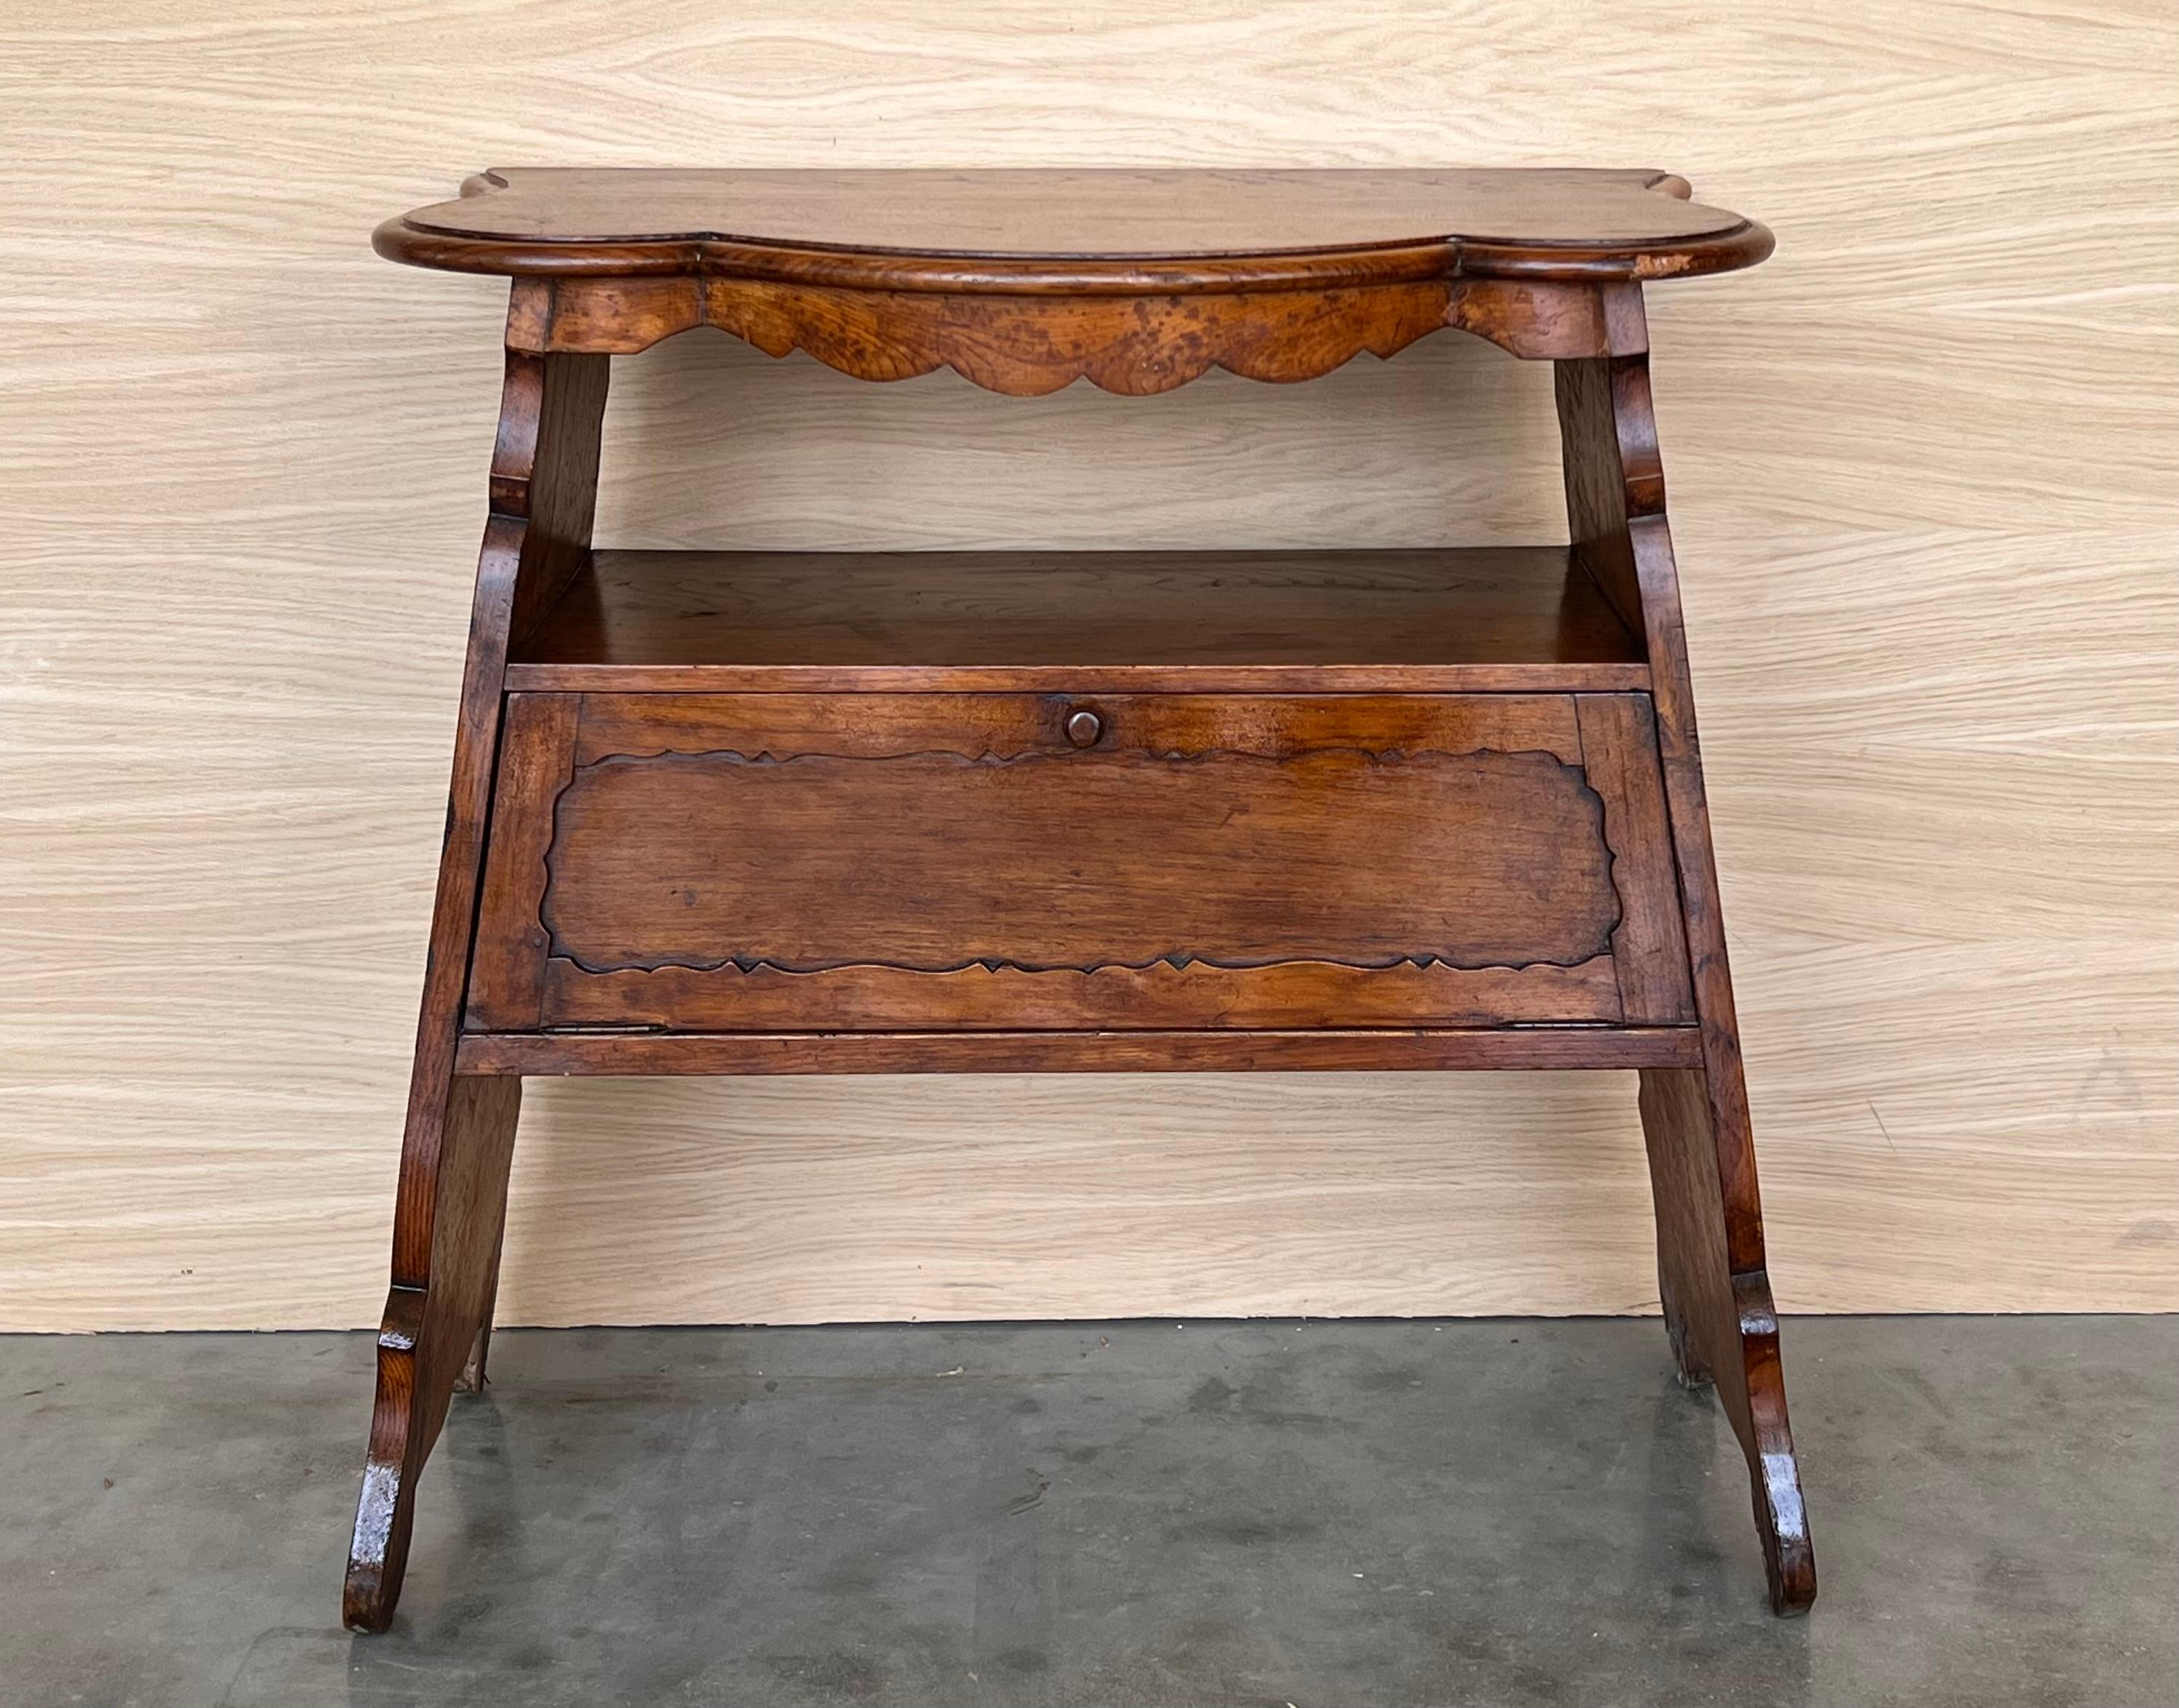 A charming Provincial beautifully aged rich patina.  Hand-crafted of solid red walnut , likely cherry-wood case and a thick walnut slab top with front and side serpentine shaped molded edge, over a rectangular solid wooden case with quality pegged